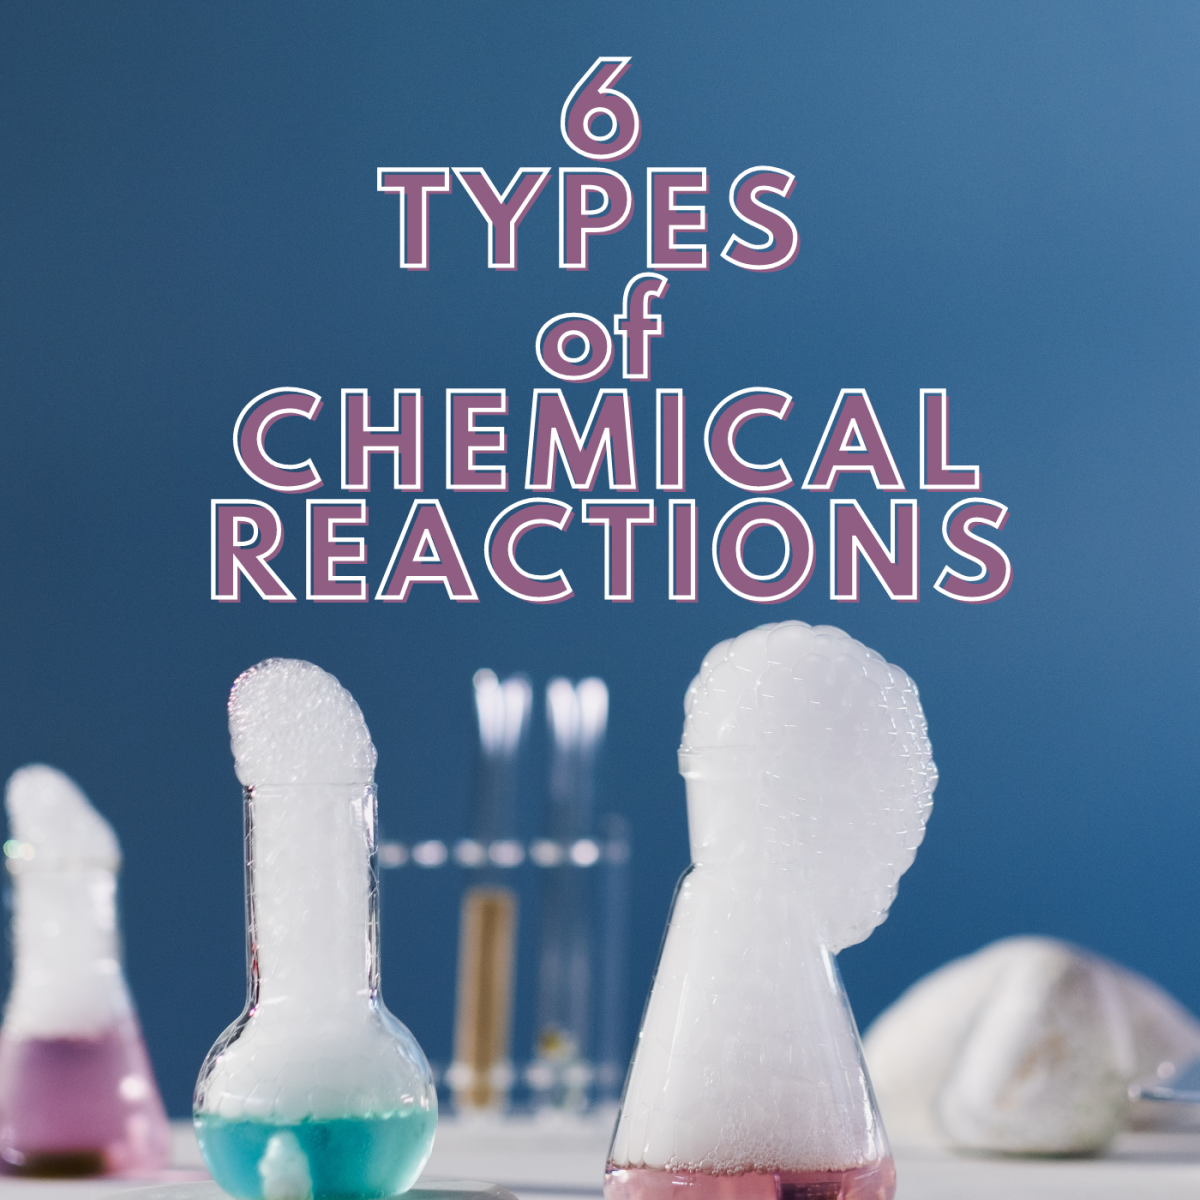 The six types of chemical reactions.